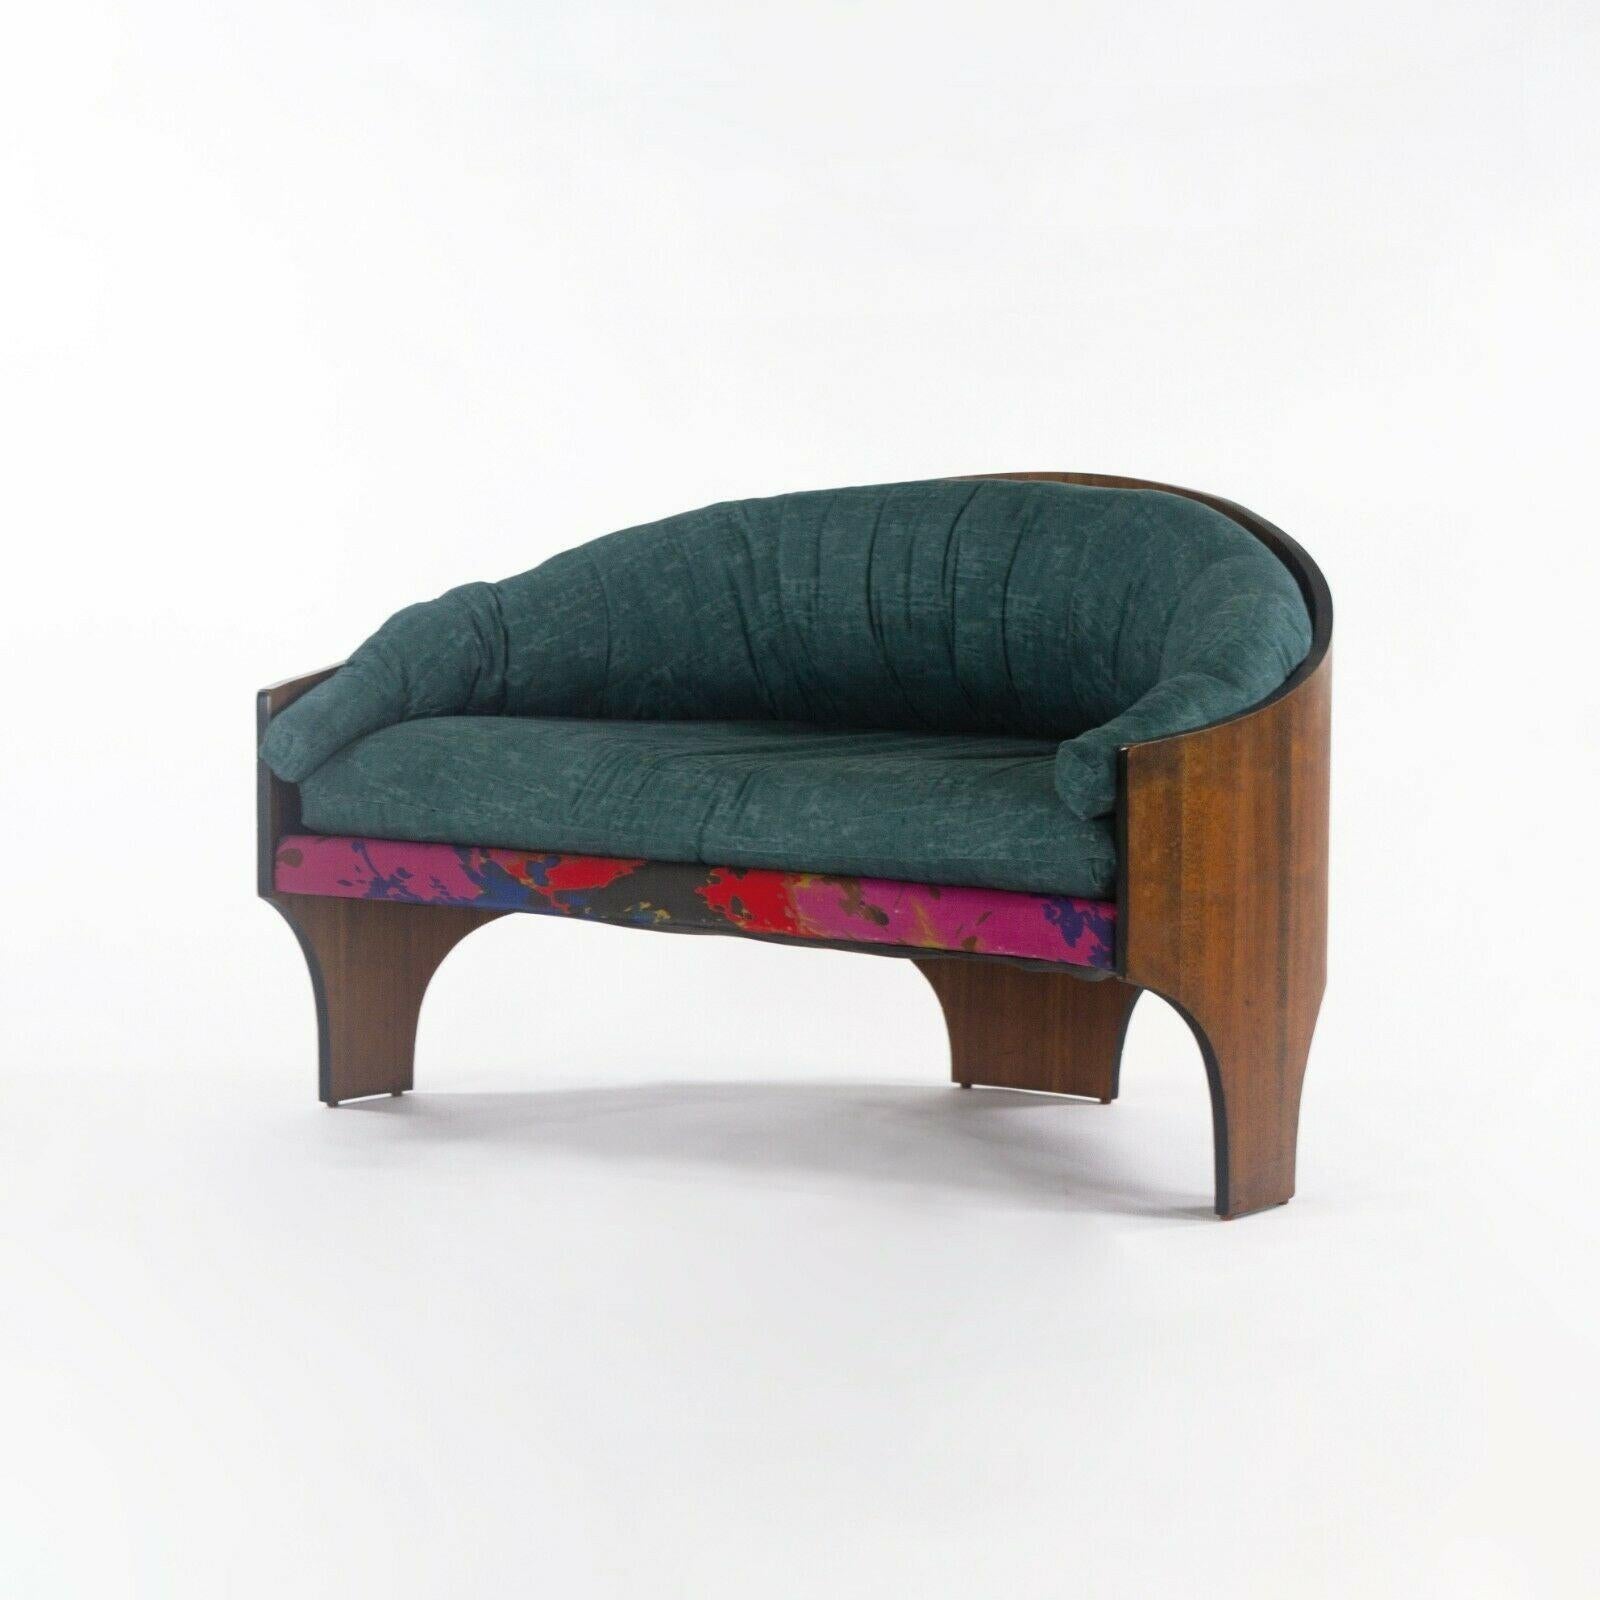 Listed for sale is a very rare Henry P. Glass for Deco House Inc. intimate island settee. Henry P. Glass was an influential designer, educator, and architect, who produced unique works of furniture that are quite difficult to find. This example came